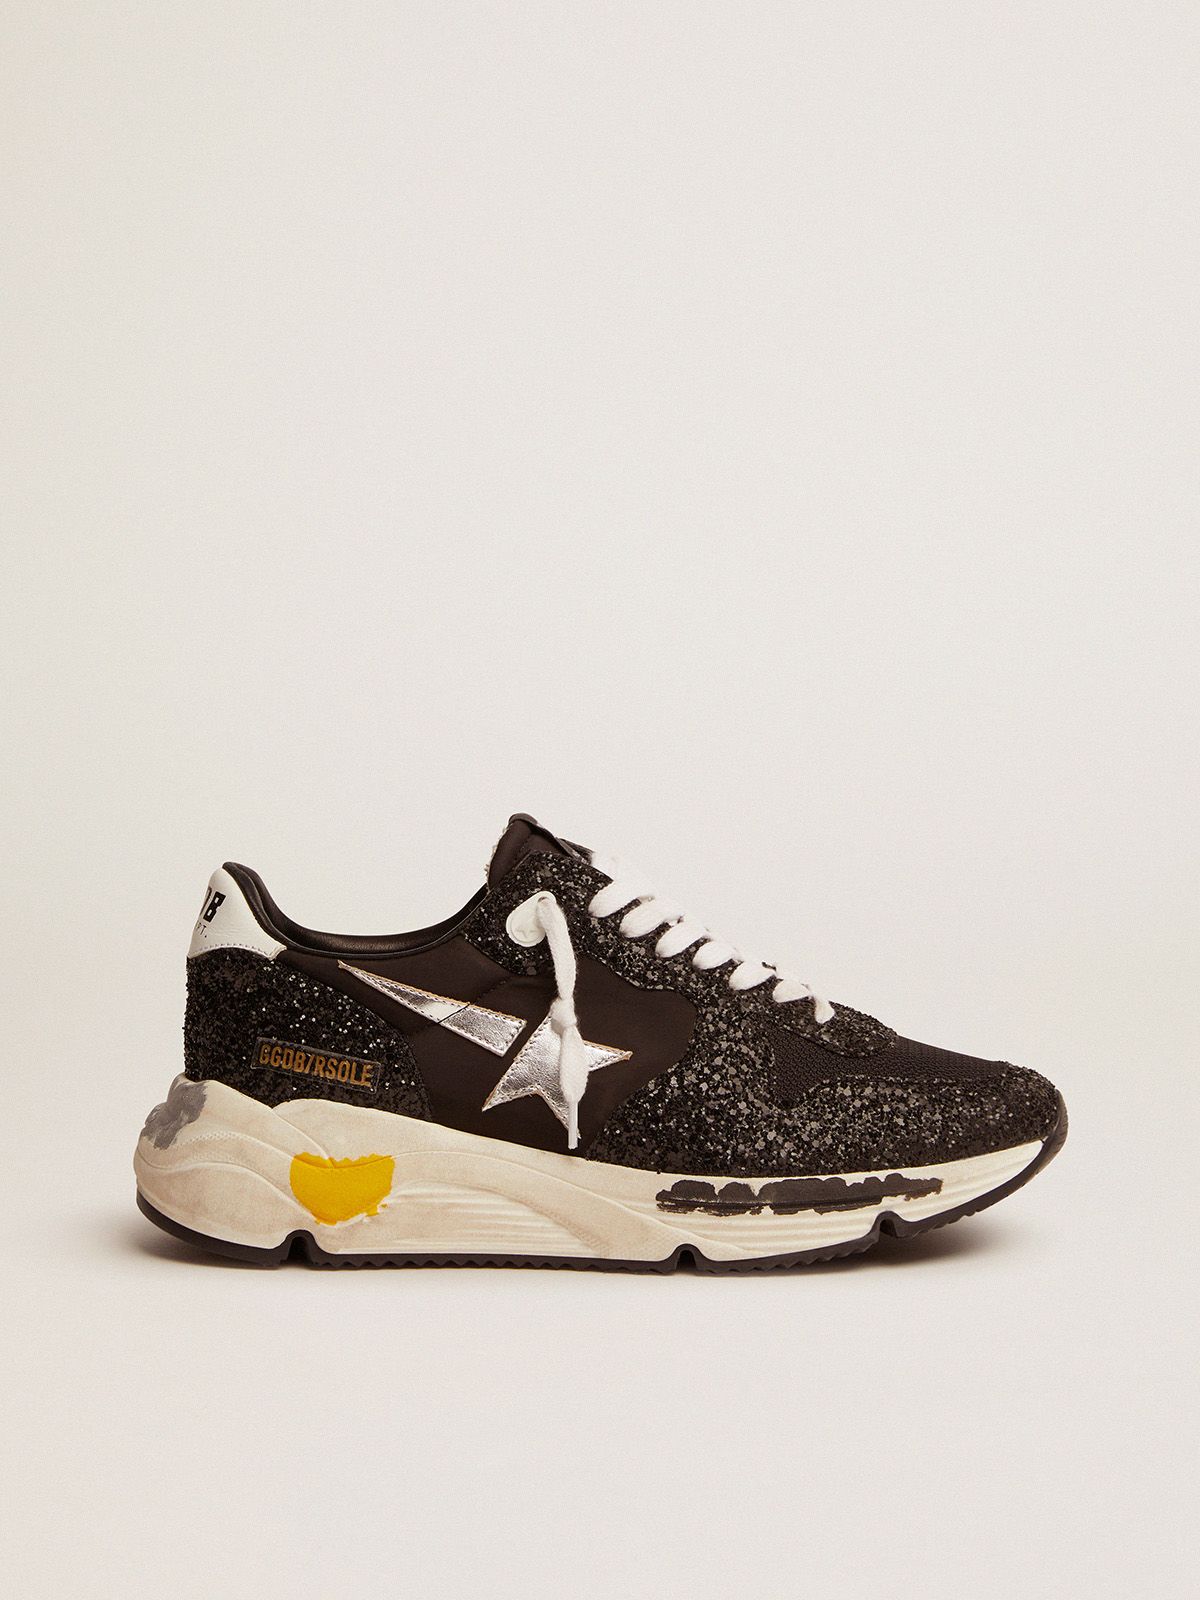 Golden Goose Ball Star Uomo Running Sole sneakers in black nylon and glitter with silver laminated leather star